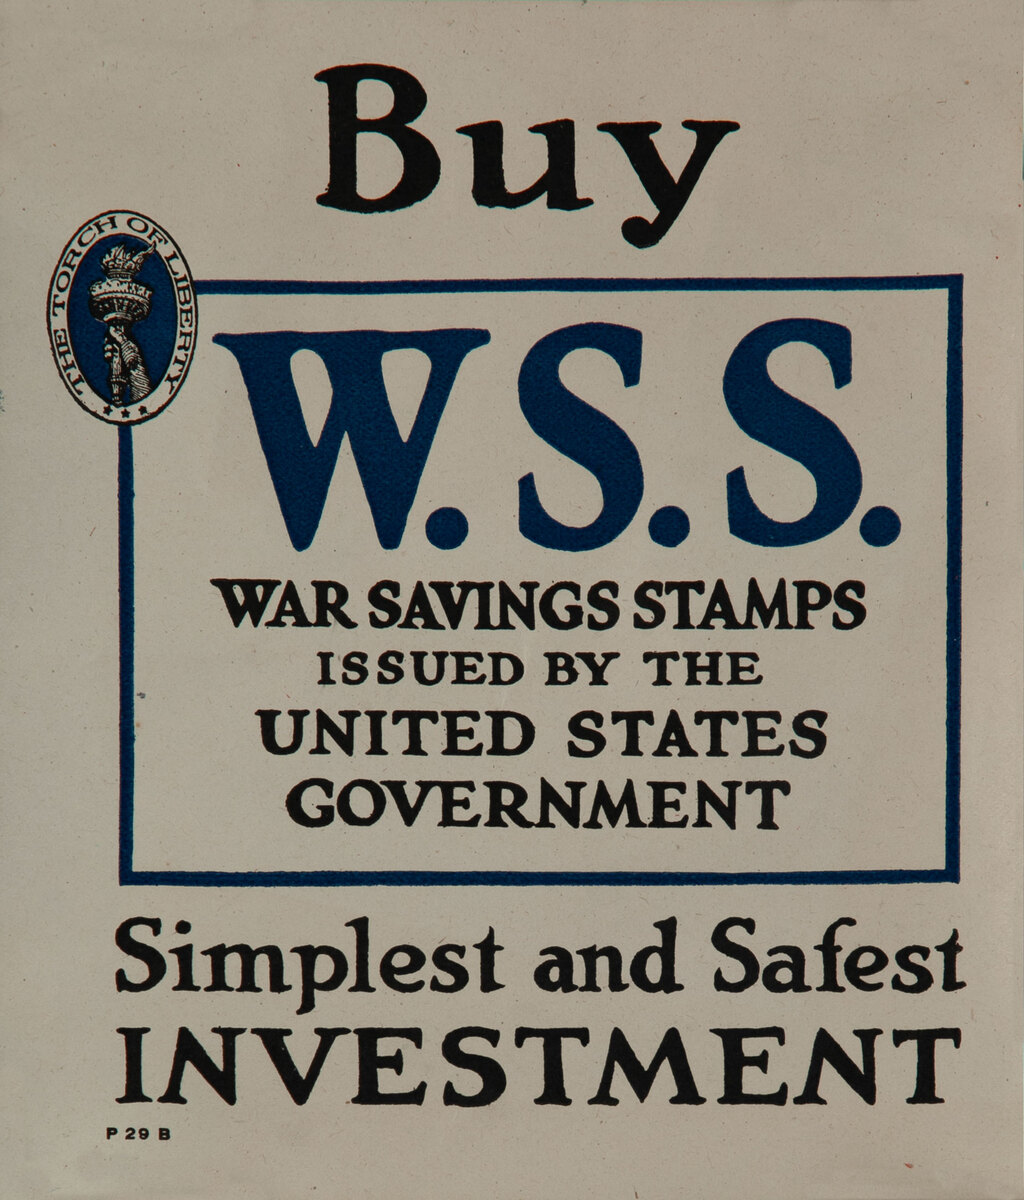 Buy W.S.S. War Saving Stamps Issued by the United States Government Original WWI Poster